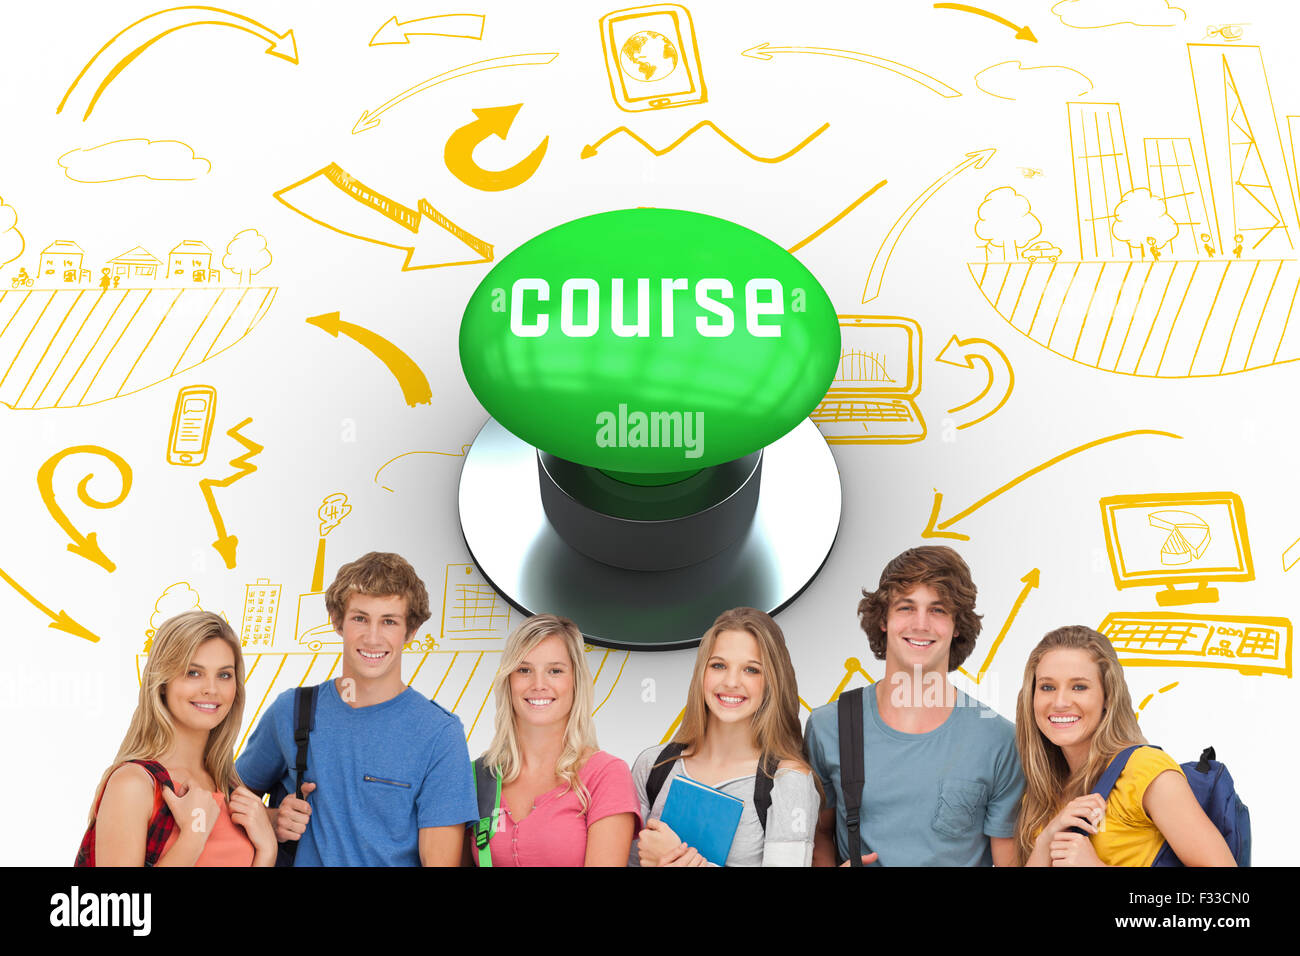 Course against digitally generated green push button Stock Photo